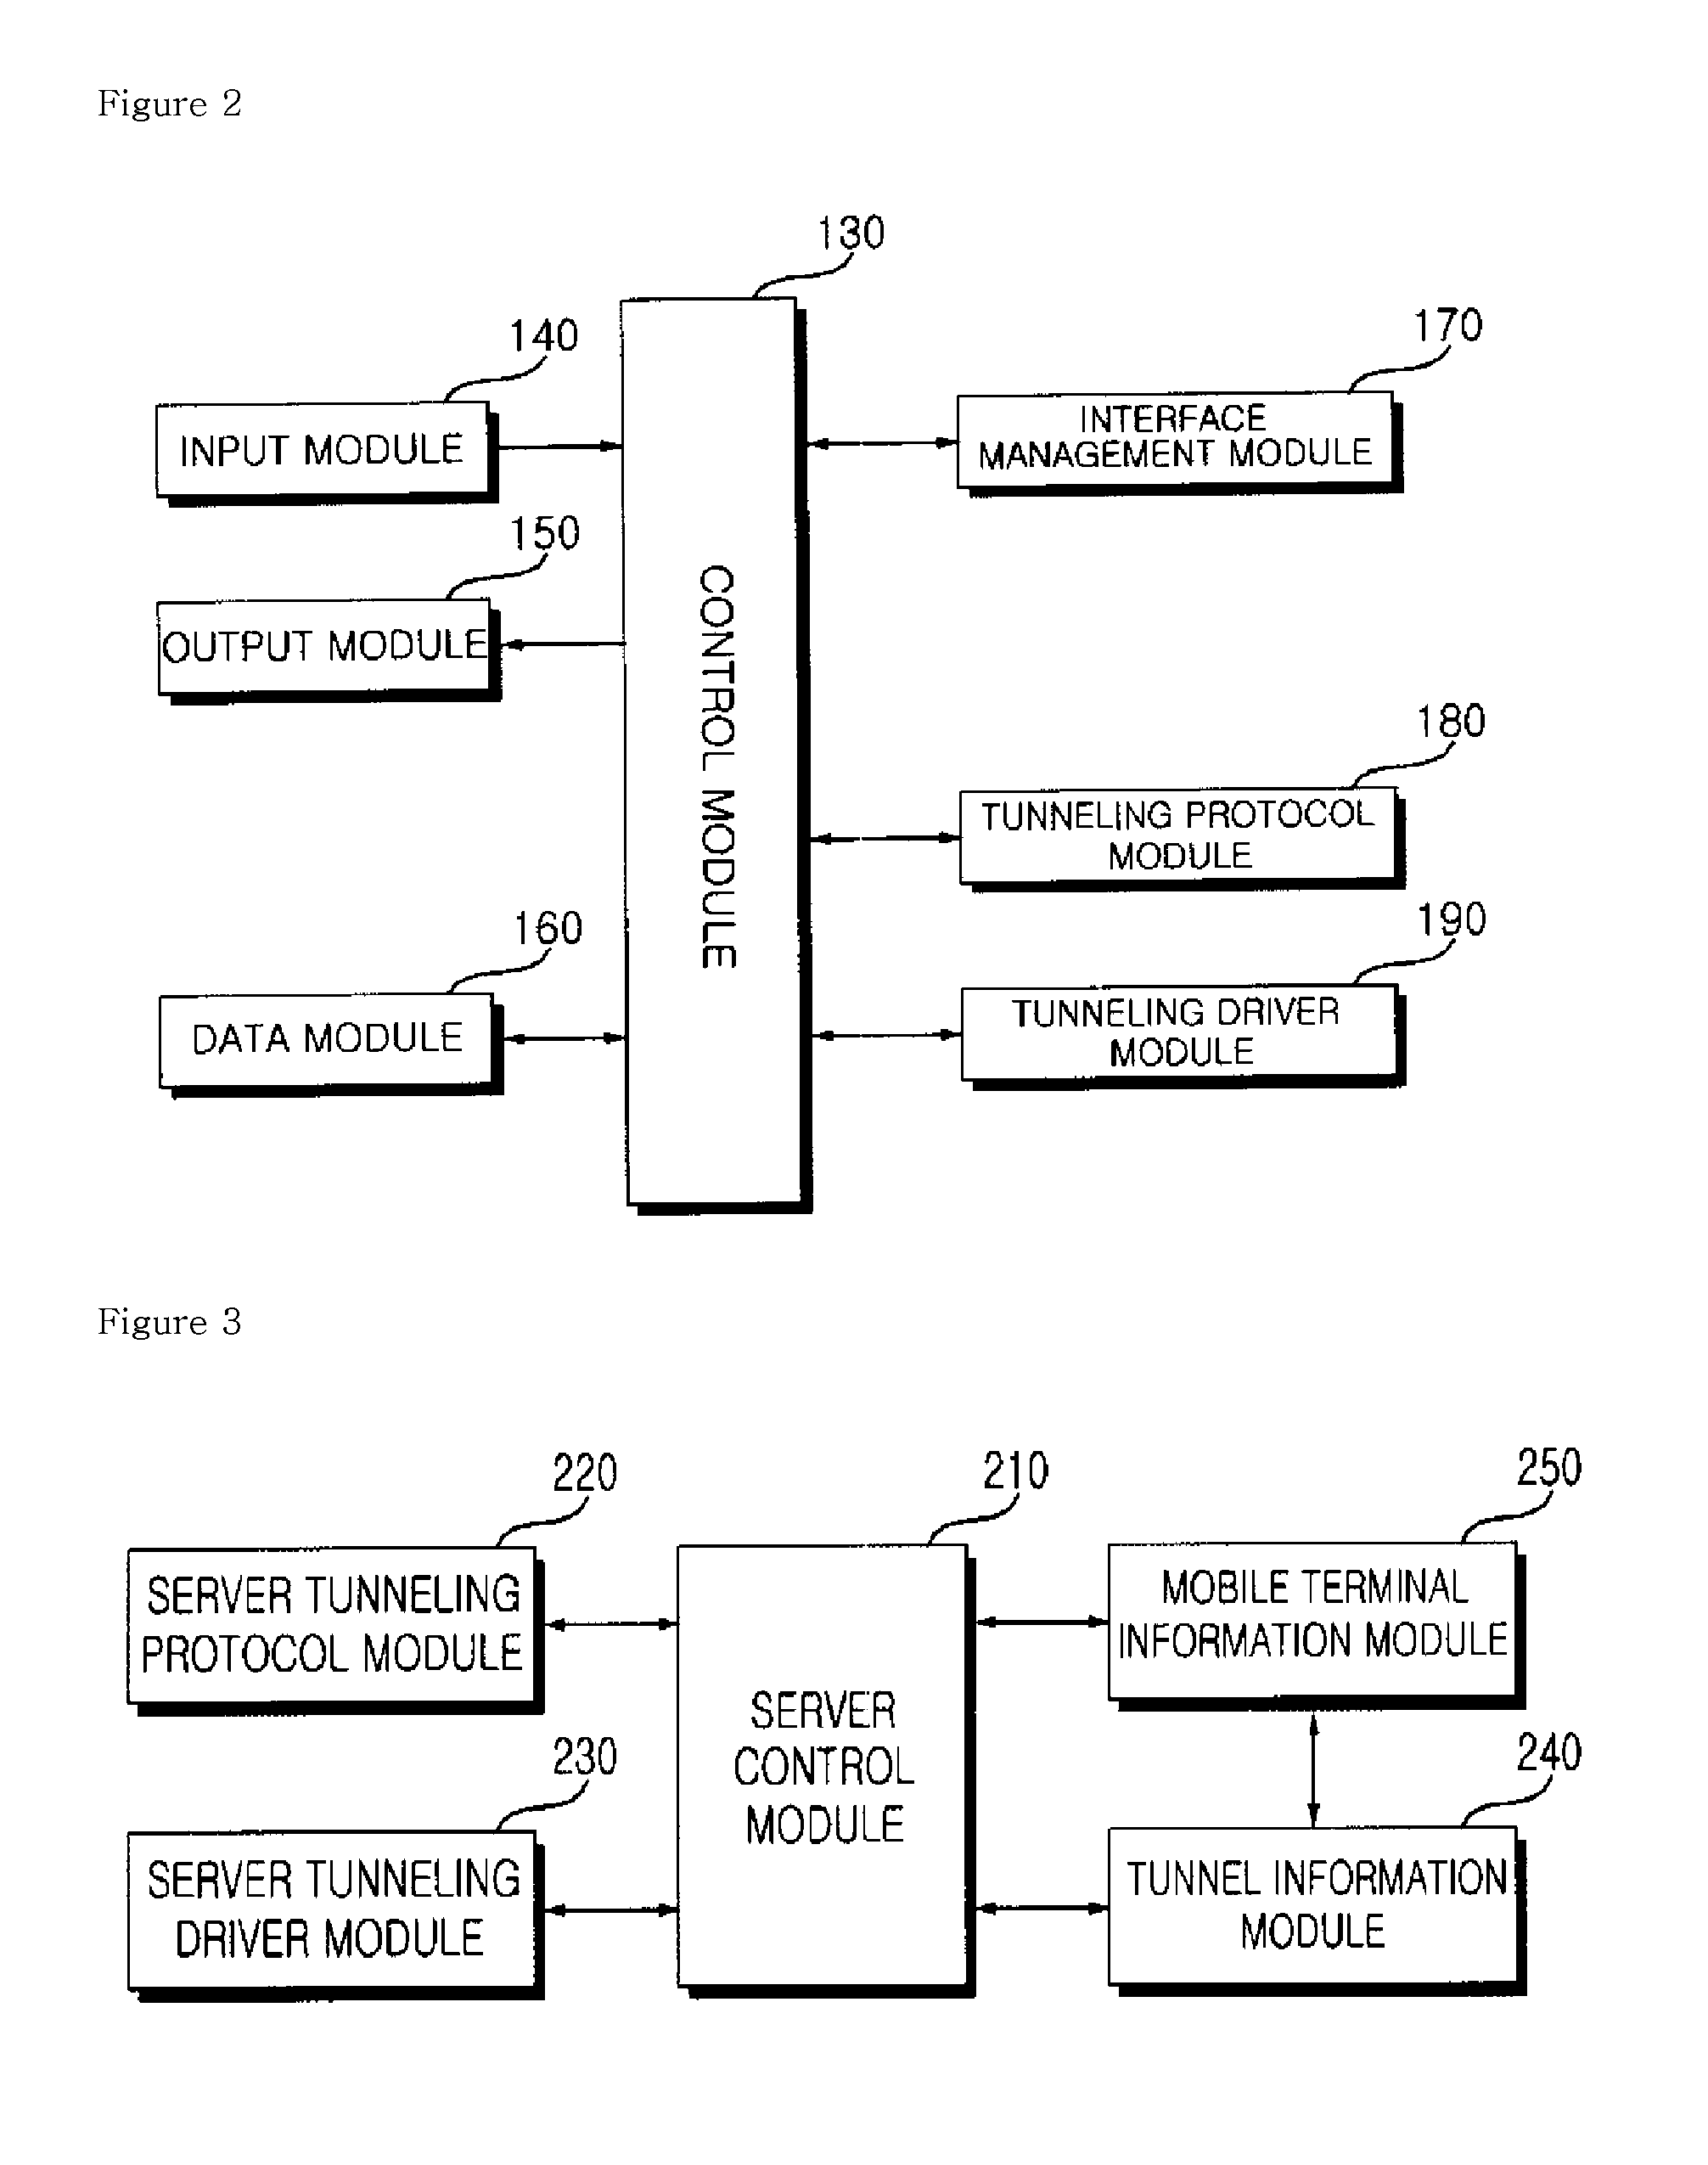 Apparatus and method of controlling seamless handover between heterogeneous networks based on IPv6 over IPv4 tunneling mechanism